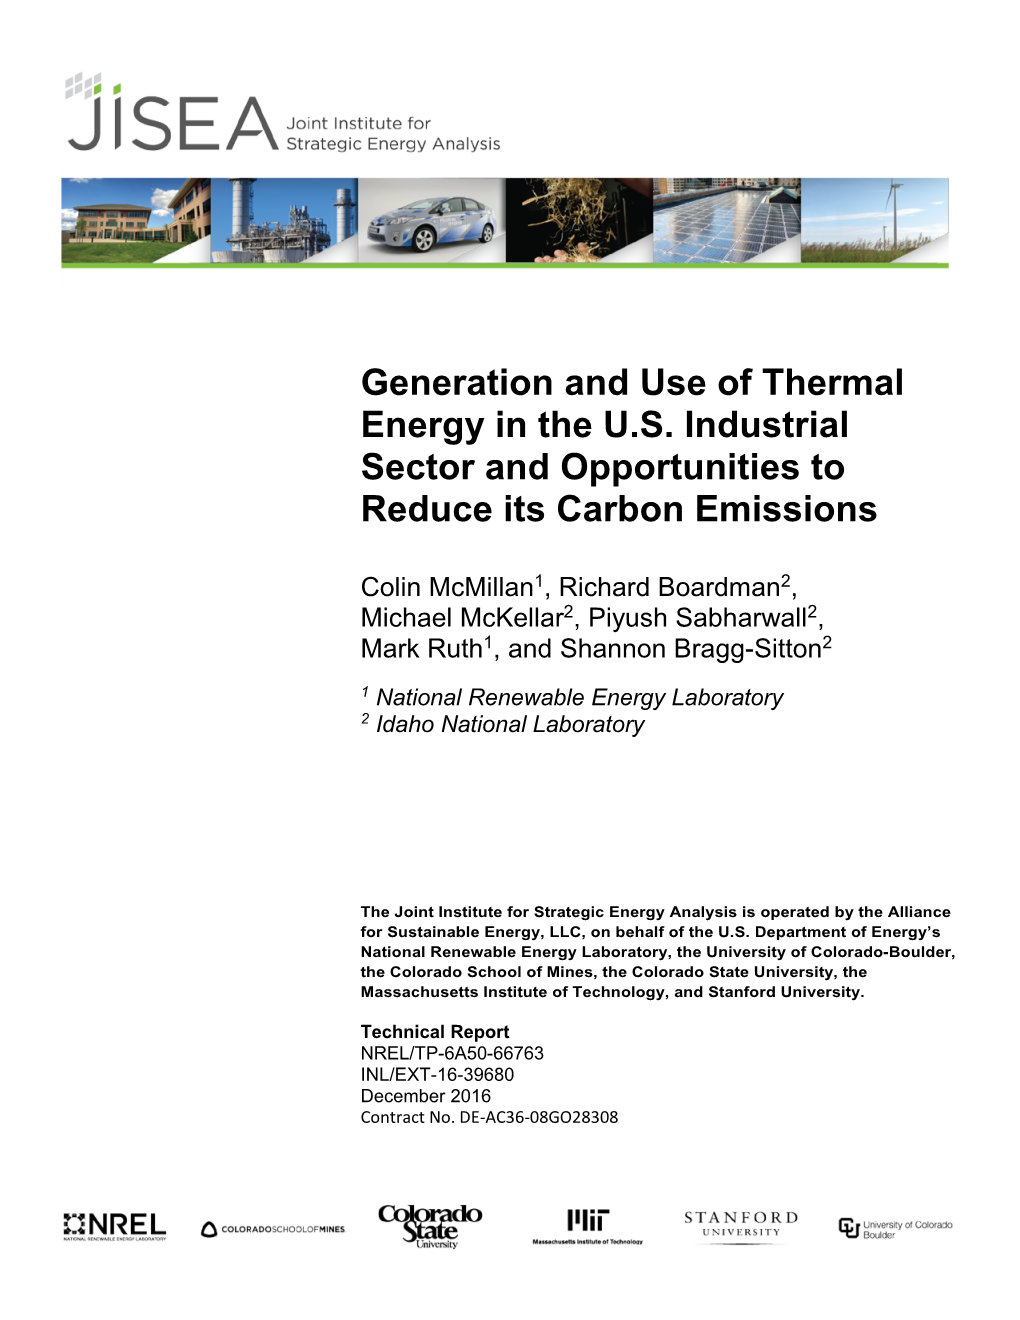 Generation and Use of Thermal Energy in the U.S. Industrial Sector and Opportunities to Reduce Its Carbon Emissions